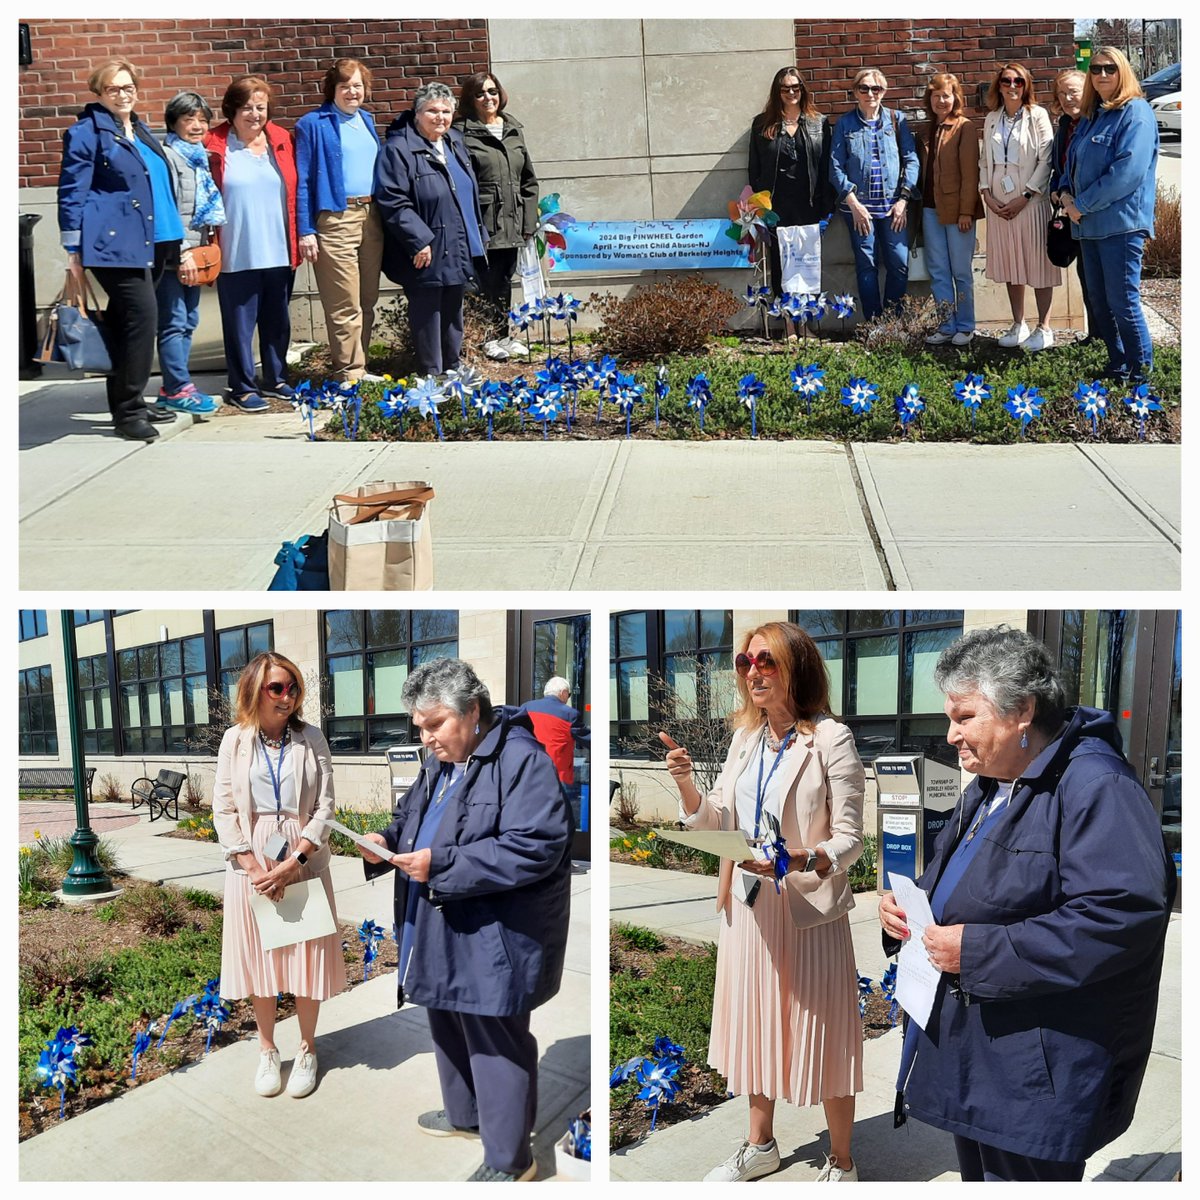 The Woman's Club of Berkeley Heights participated in our annual Pinwheels for Prevention campaign. Mayor Angie Devanney of Berkeley Heights Township, Union County, NJ presented a Proclamation for Child Abuse Prevention Month. Pinwheels were 'planted' and are on display all month.